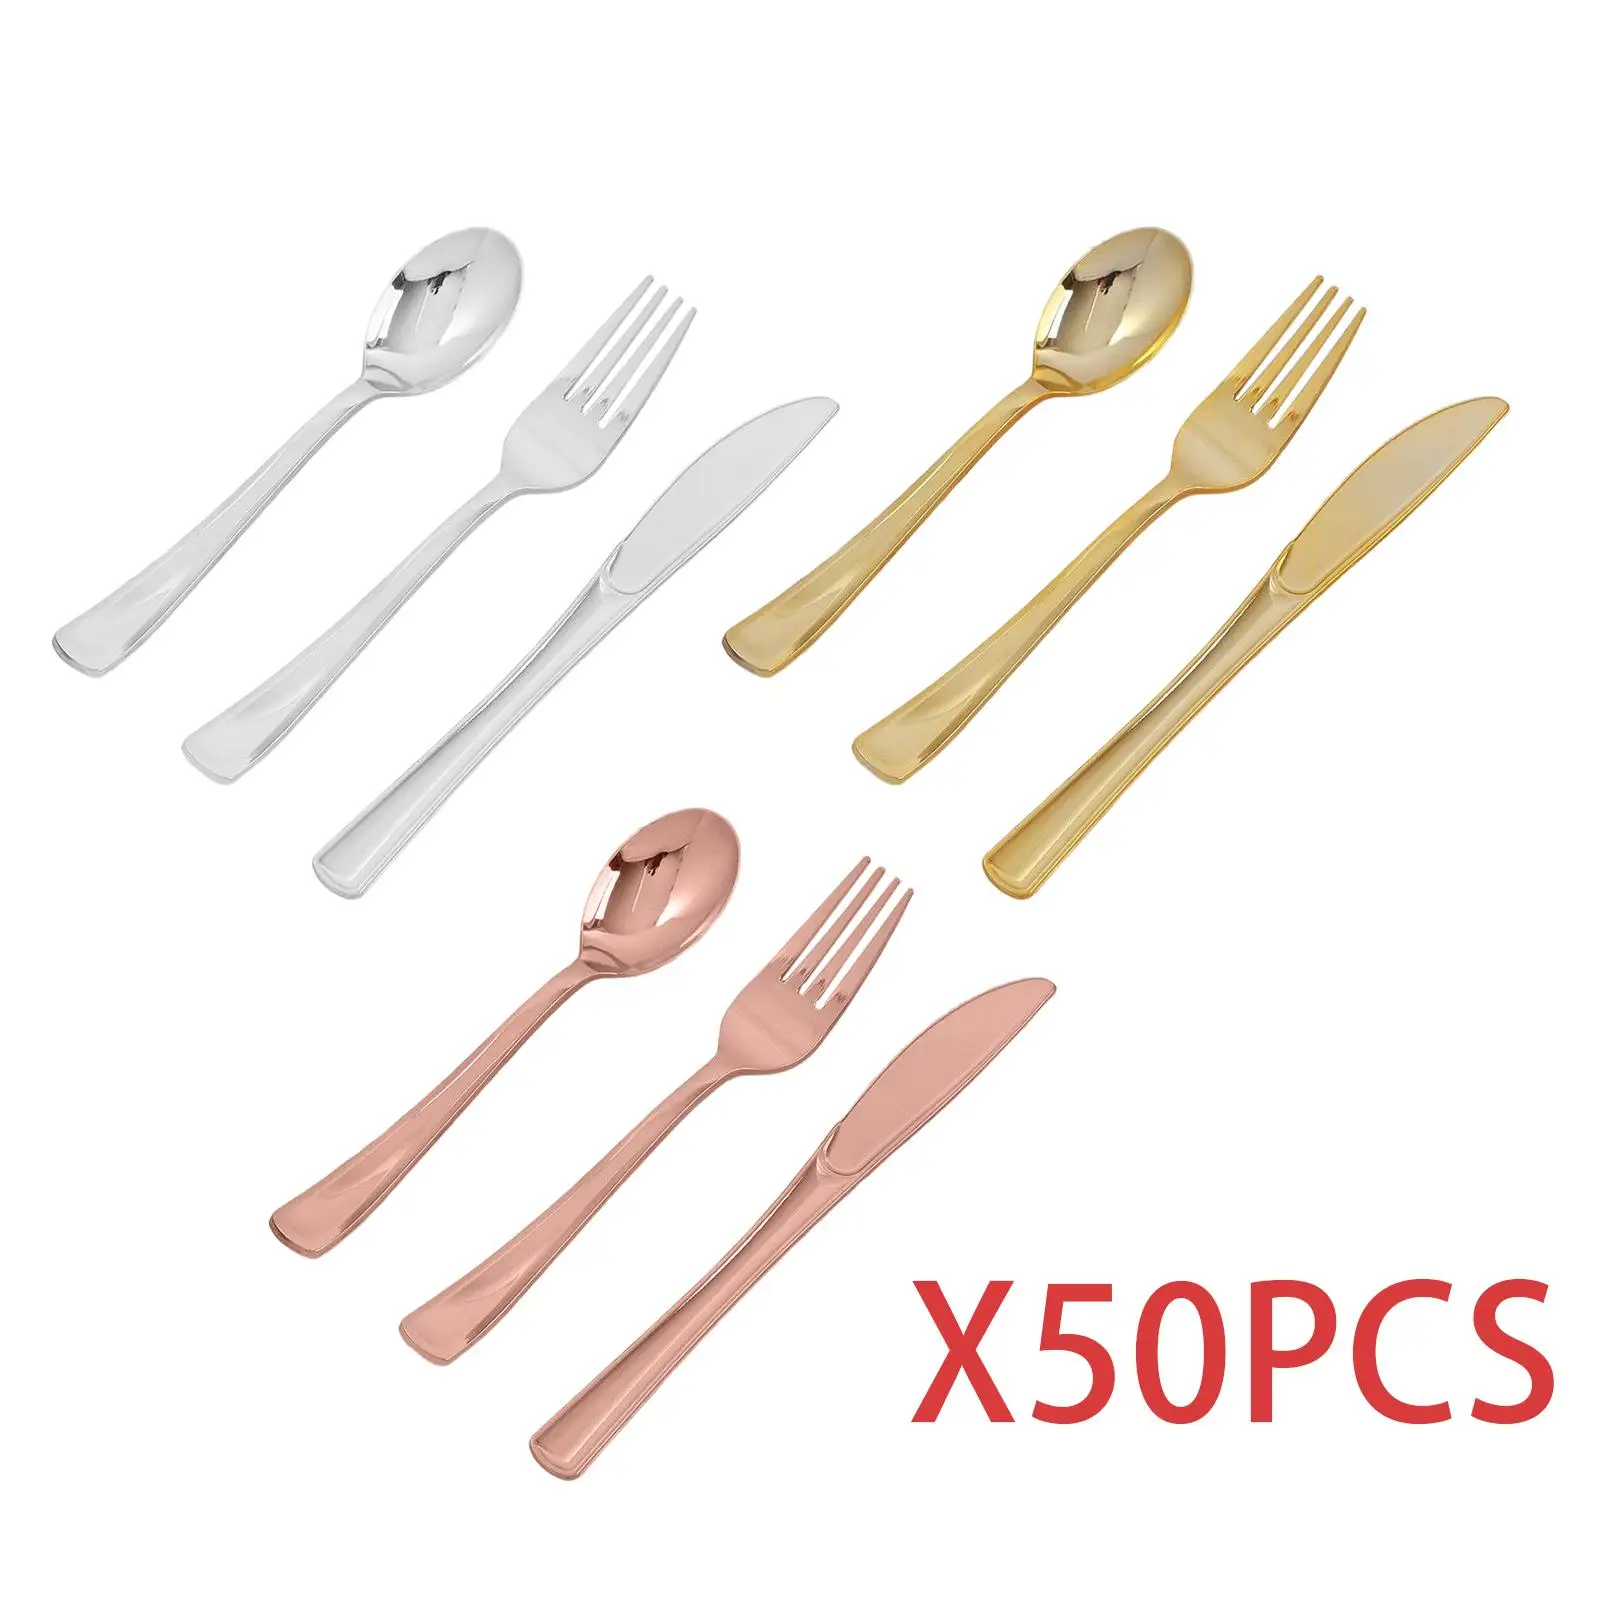 Disposable Tableware Decoration Supplies Sturdy Dinnerware Flatware for Engagement Catering Events Parties Dinners Dessert Shop